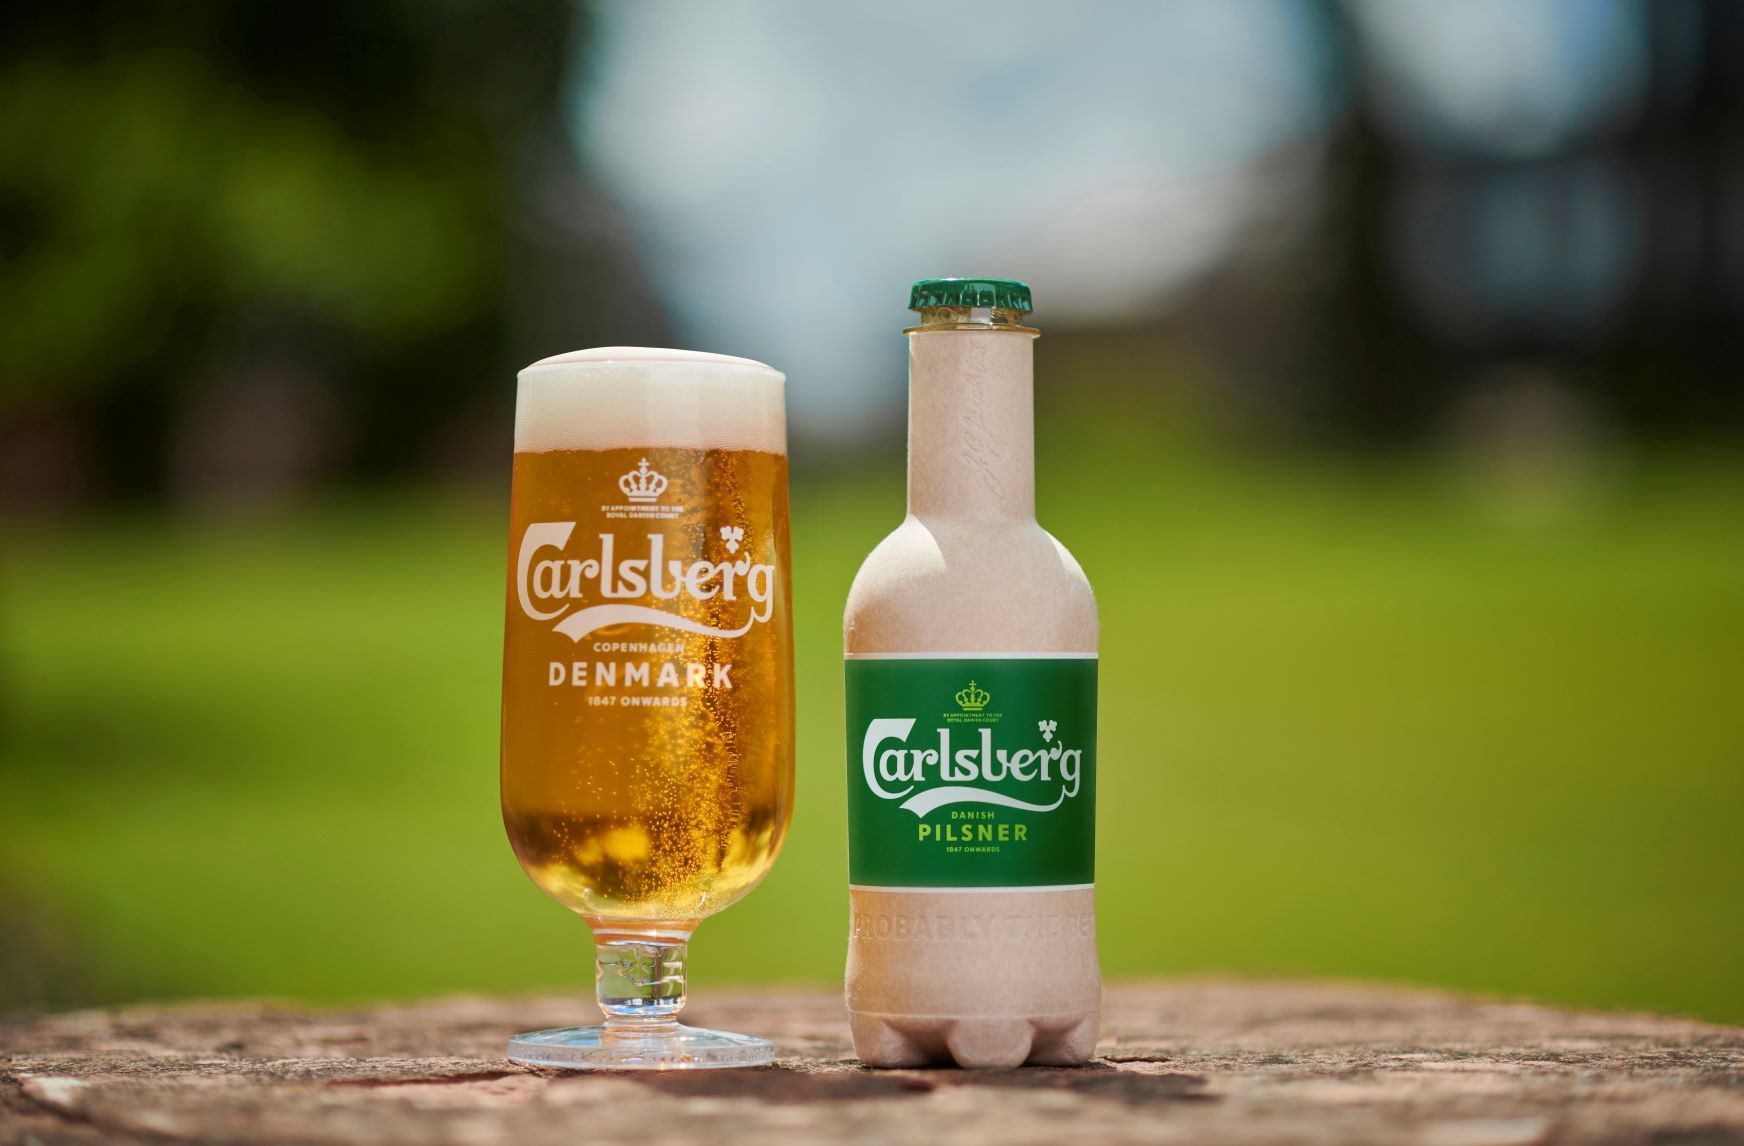 Carlsberg trials bio-based and fully recyclable bottles with consumers